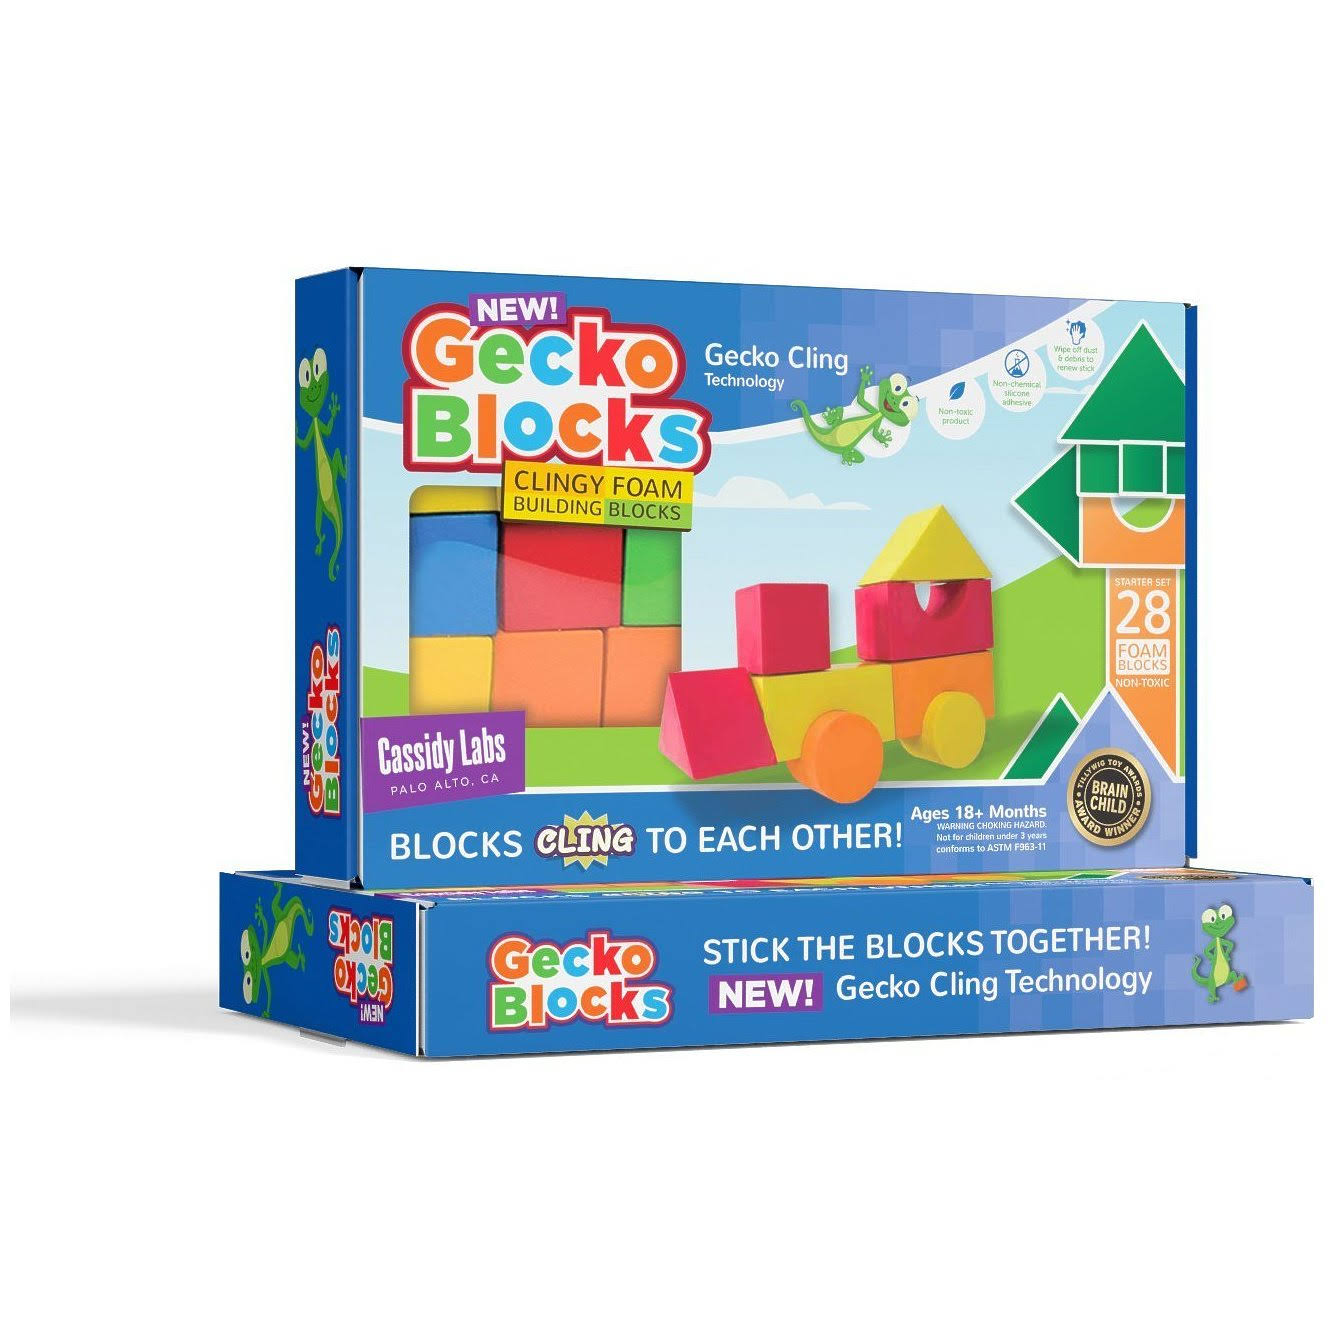 Cassidy Labs Gecko Blocks Sticky Block Construction Toy For Kids Works in Bath and On Windows